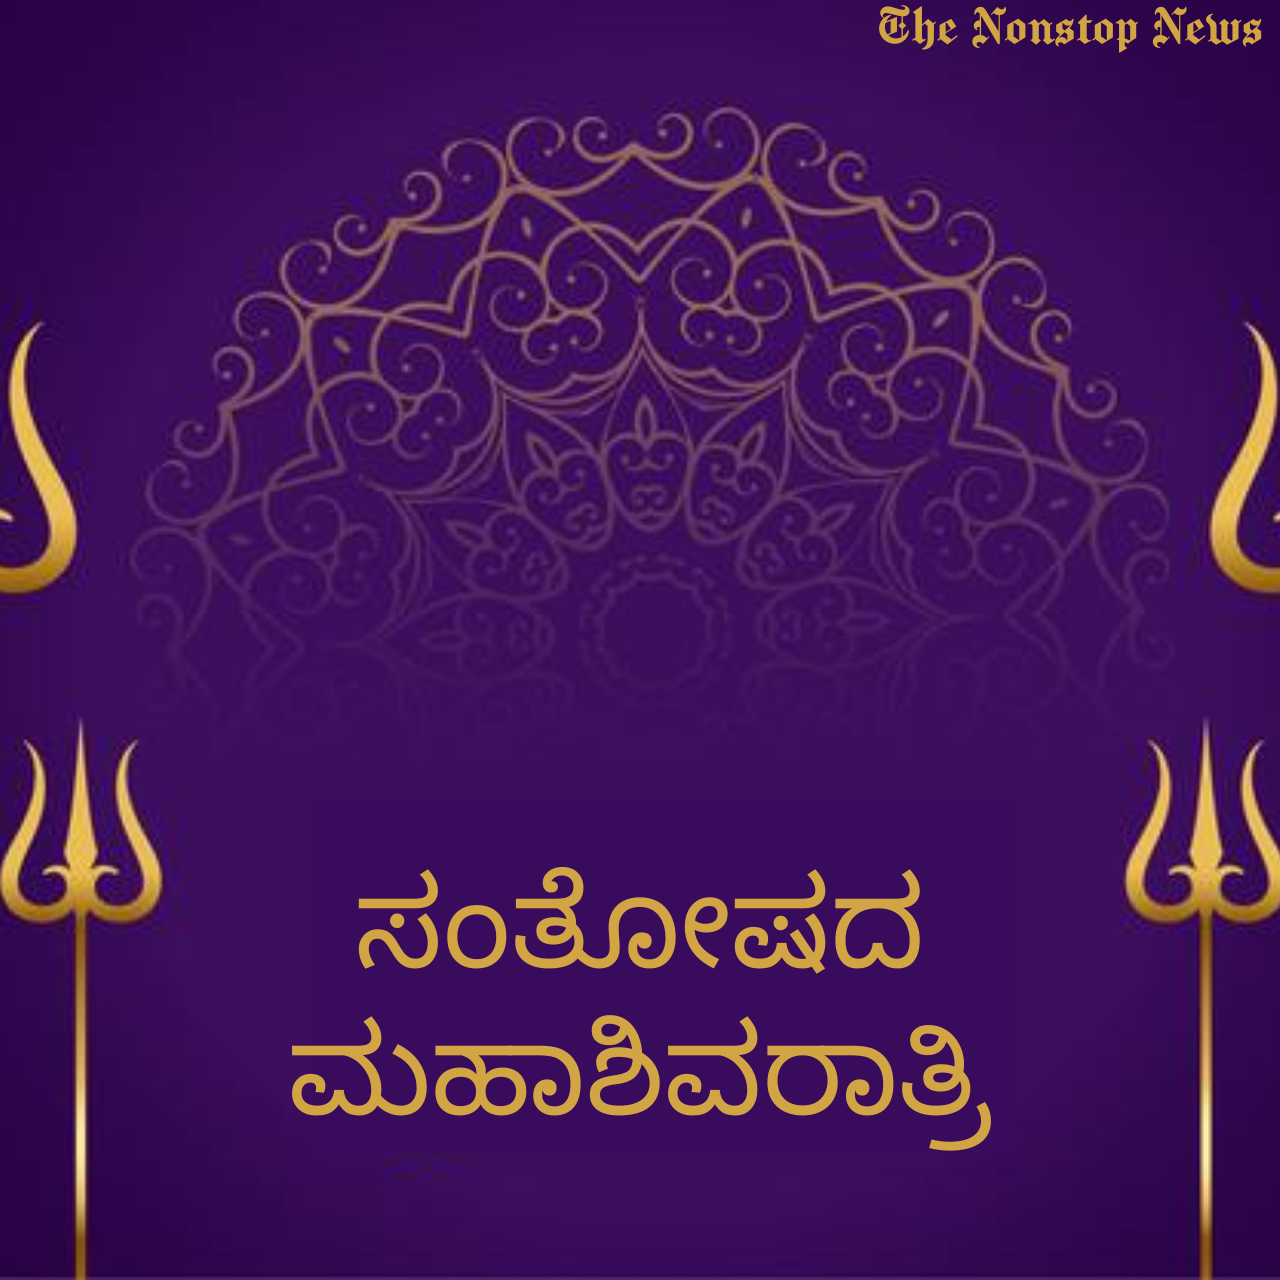 Maha Shivratri 2021 Wishes in Kannada Quotes, Messages, Greetings, and HD Images to Share